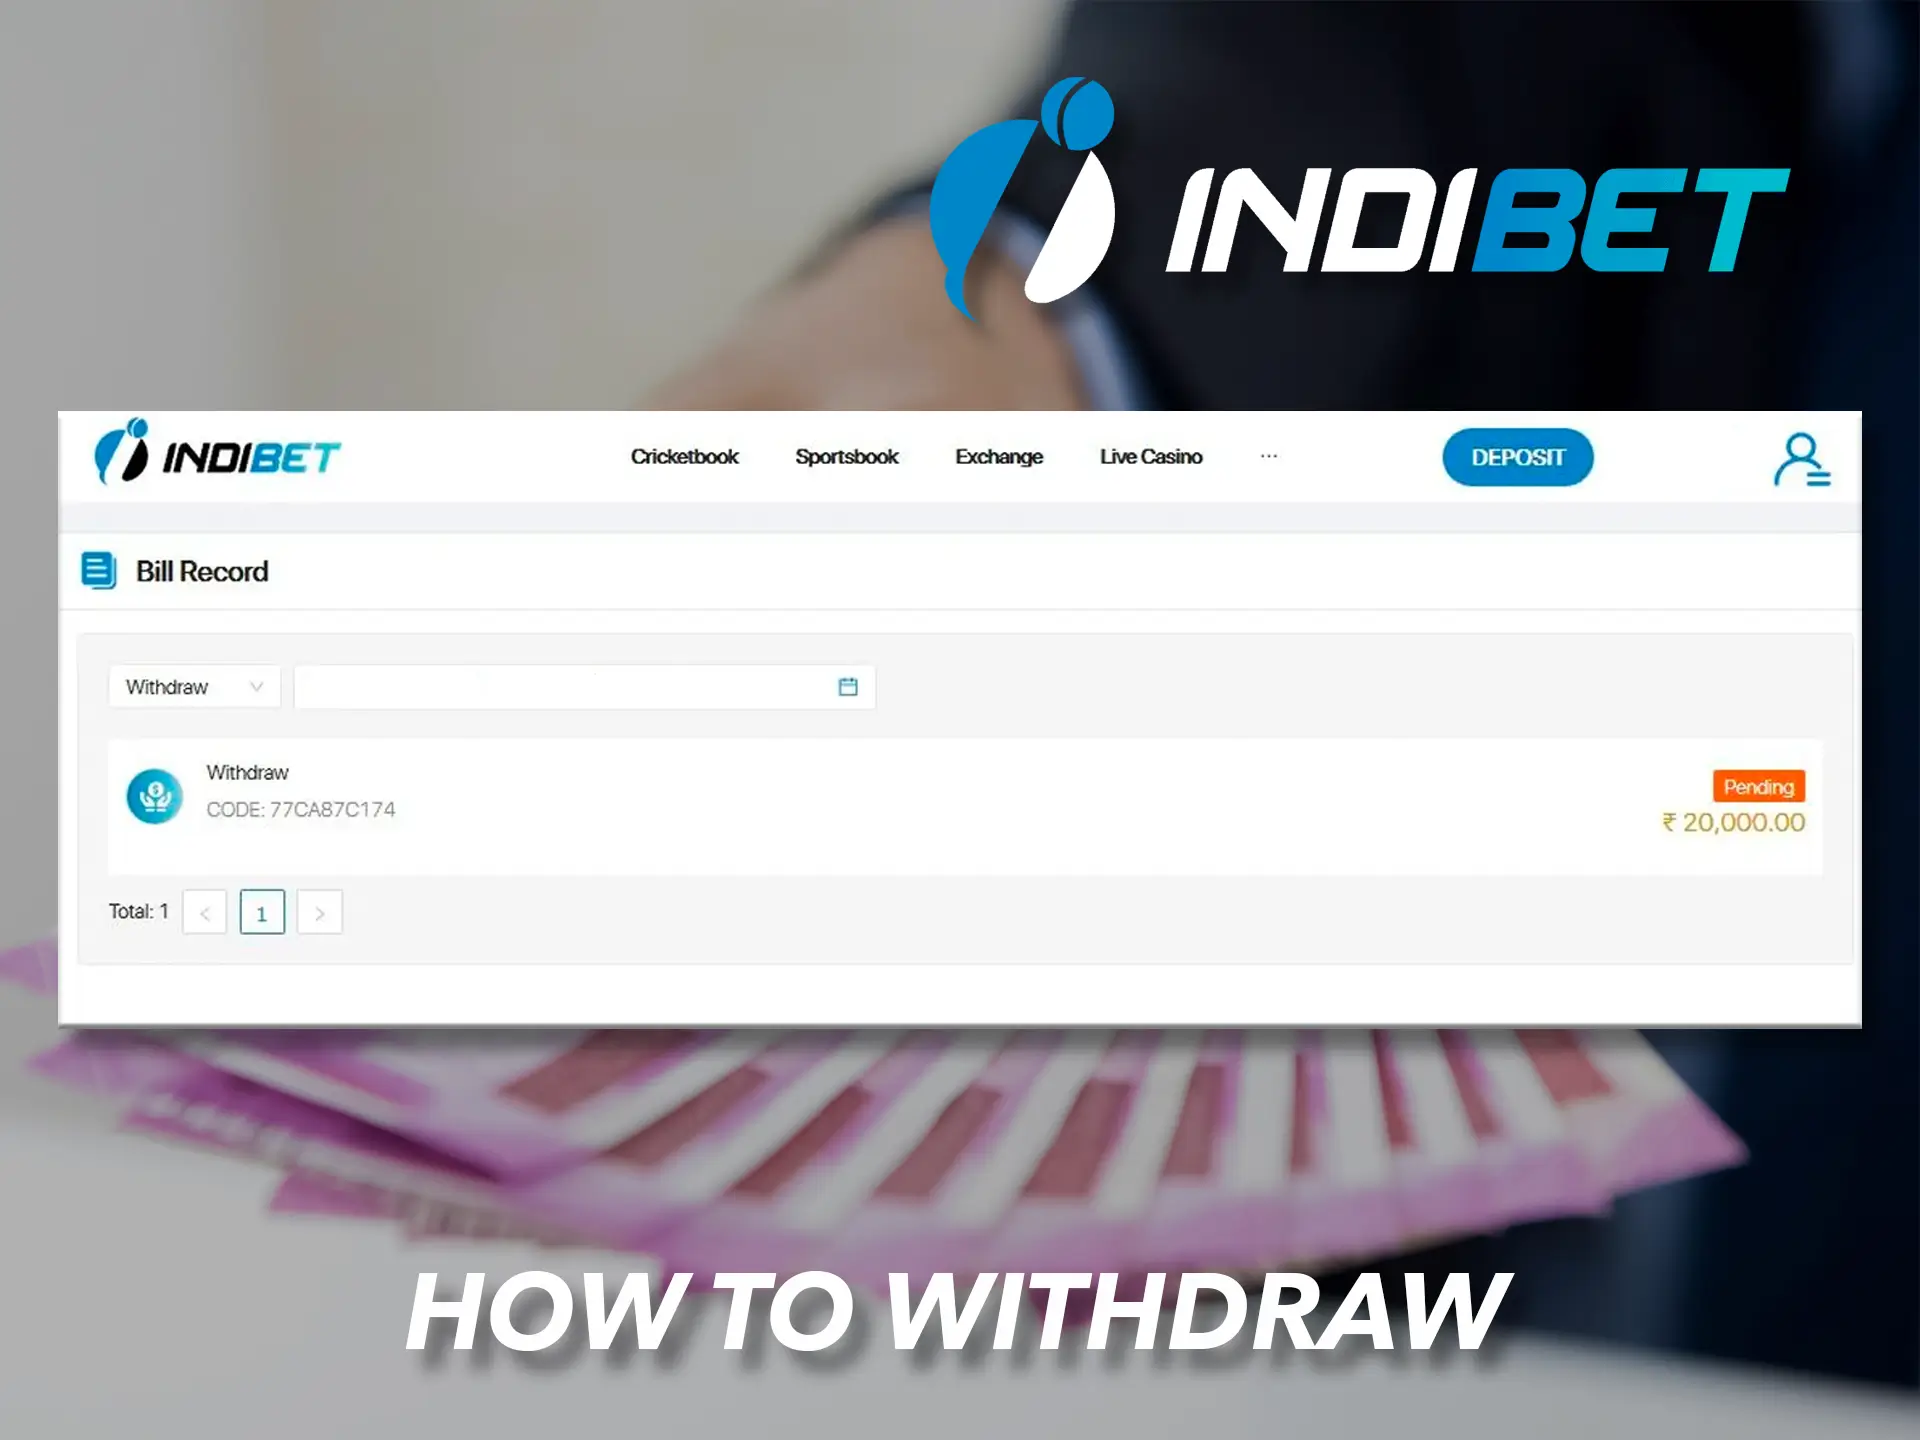 Take advantage of instant withdrawals at Indibet.